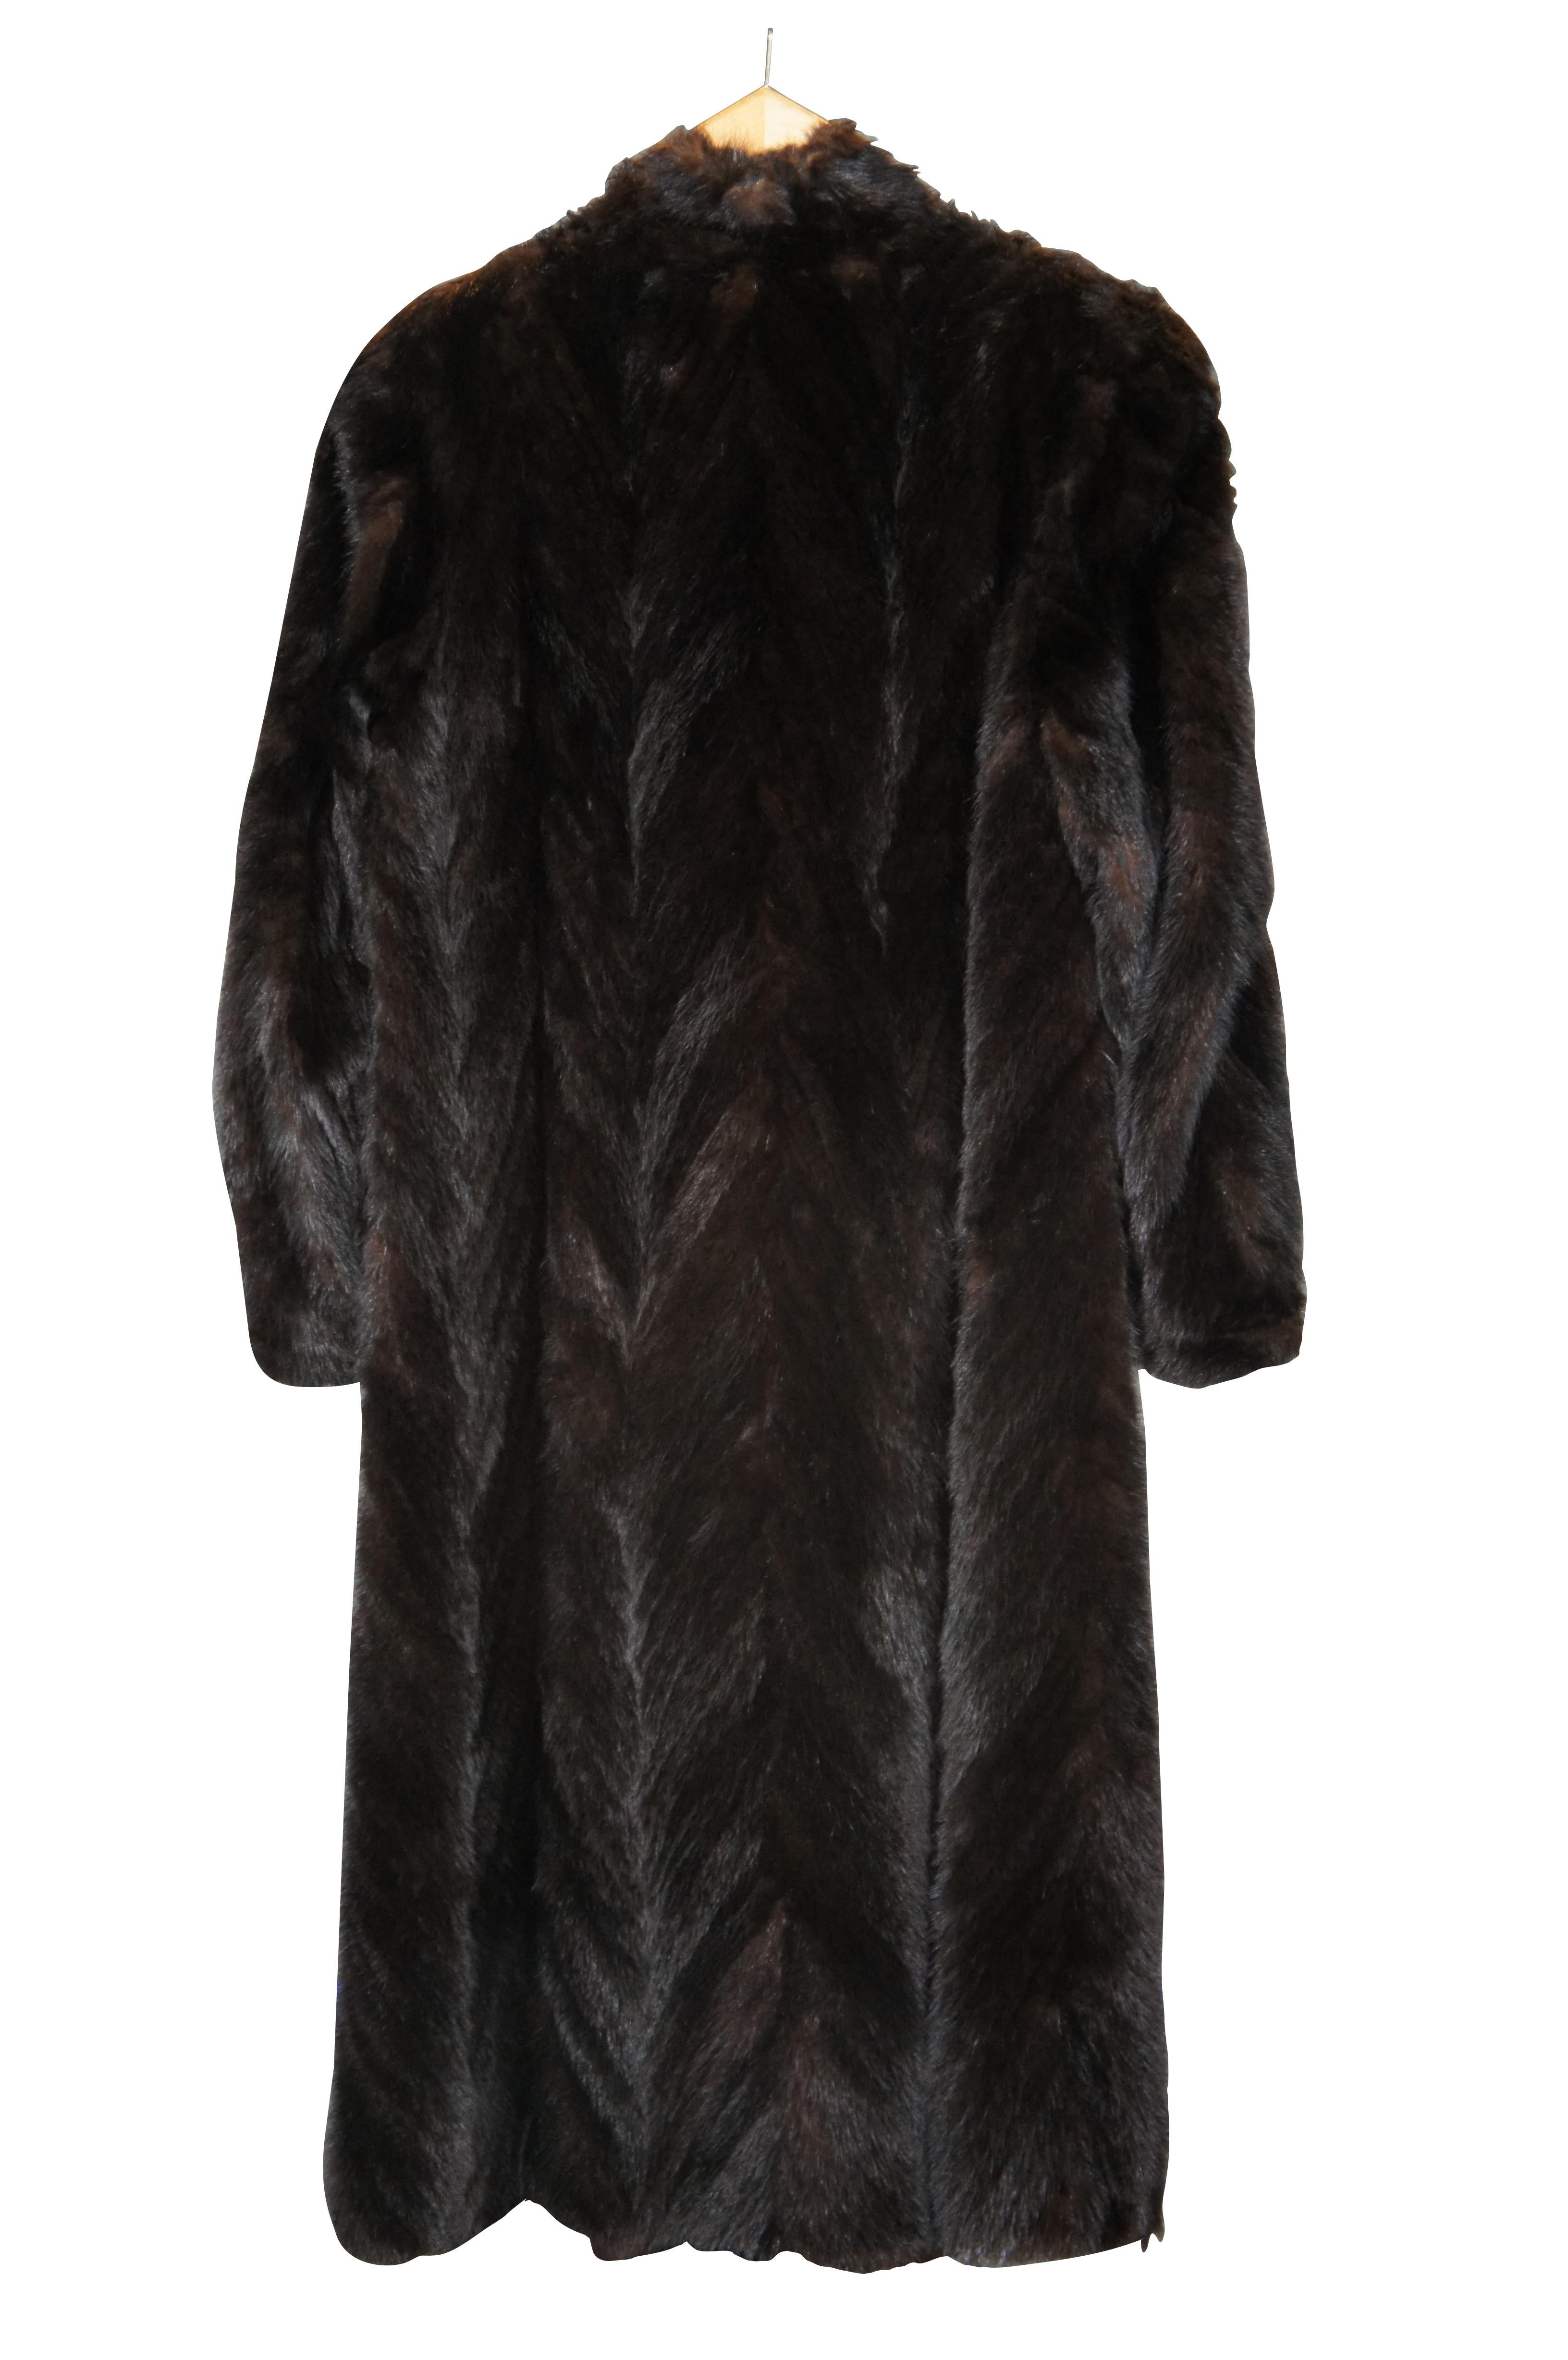 Vintage mid to late 20th century women’s, full length, dark brown mink fur coat featuring a subtle chevron pattern, hook and loop closure all the way down the front, two side pockets and brown lining. Includes Ambienence by Spiegel garment storage